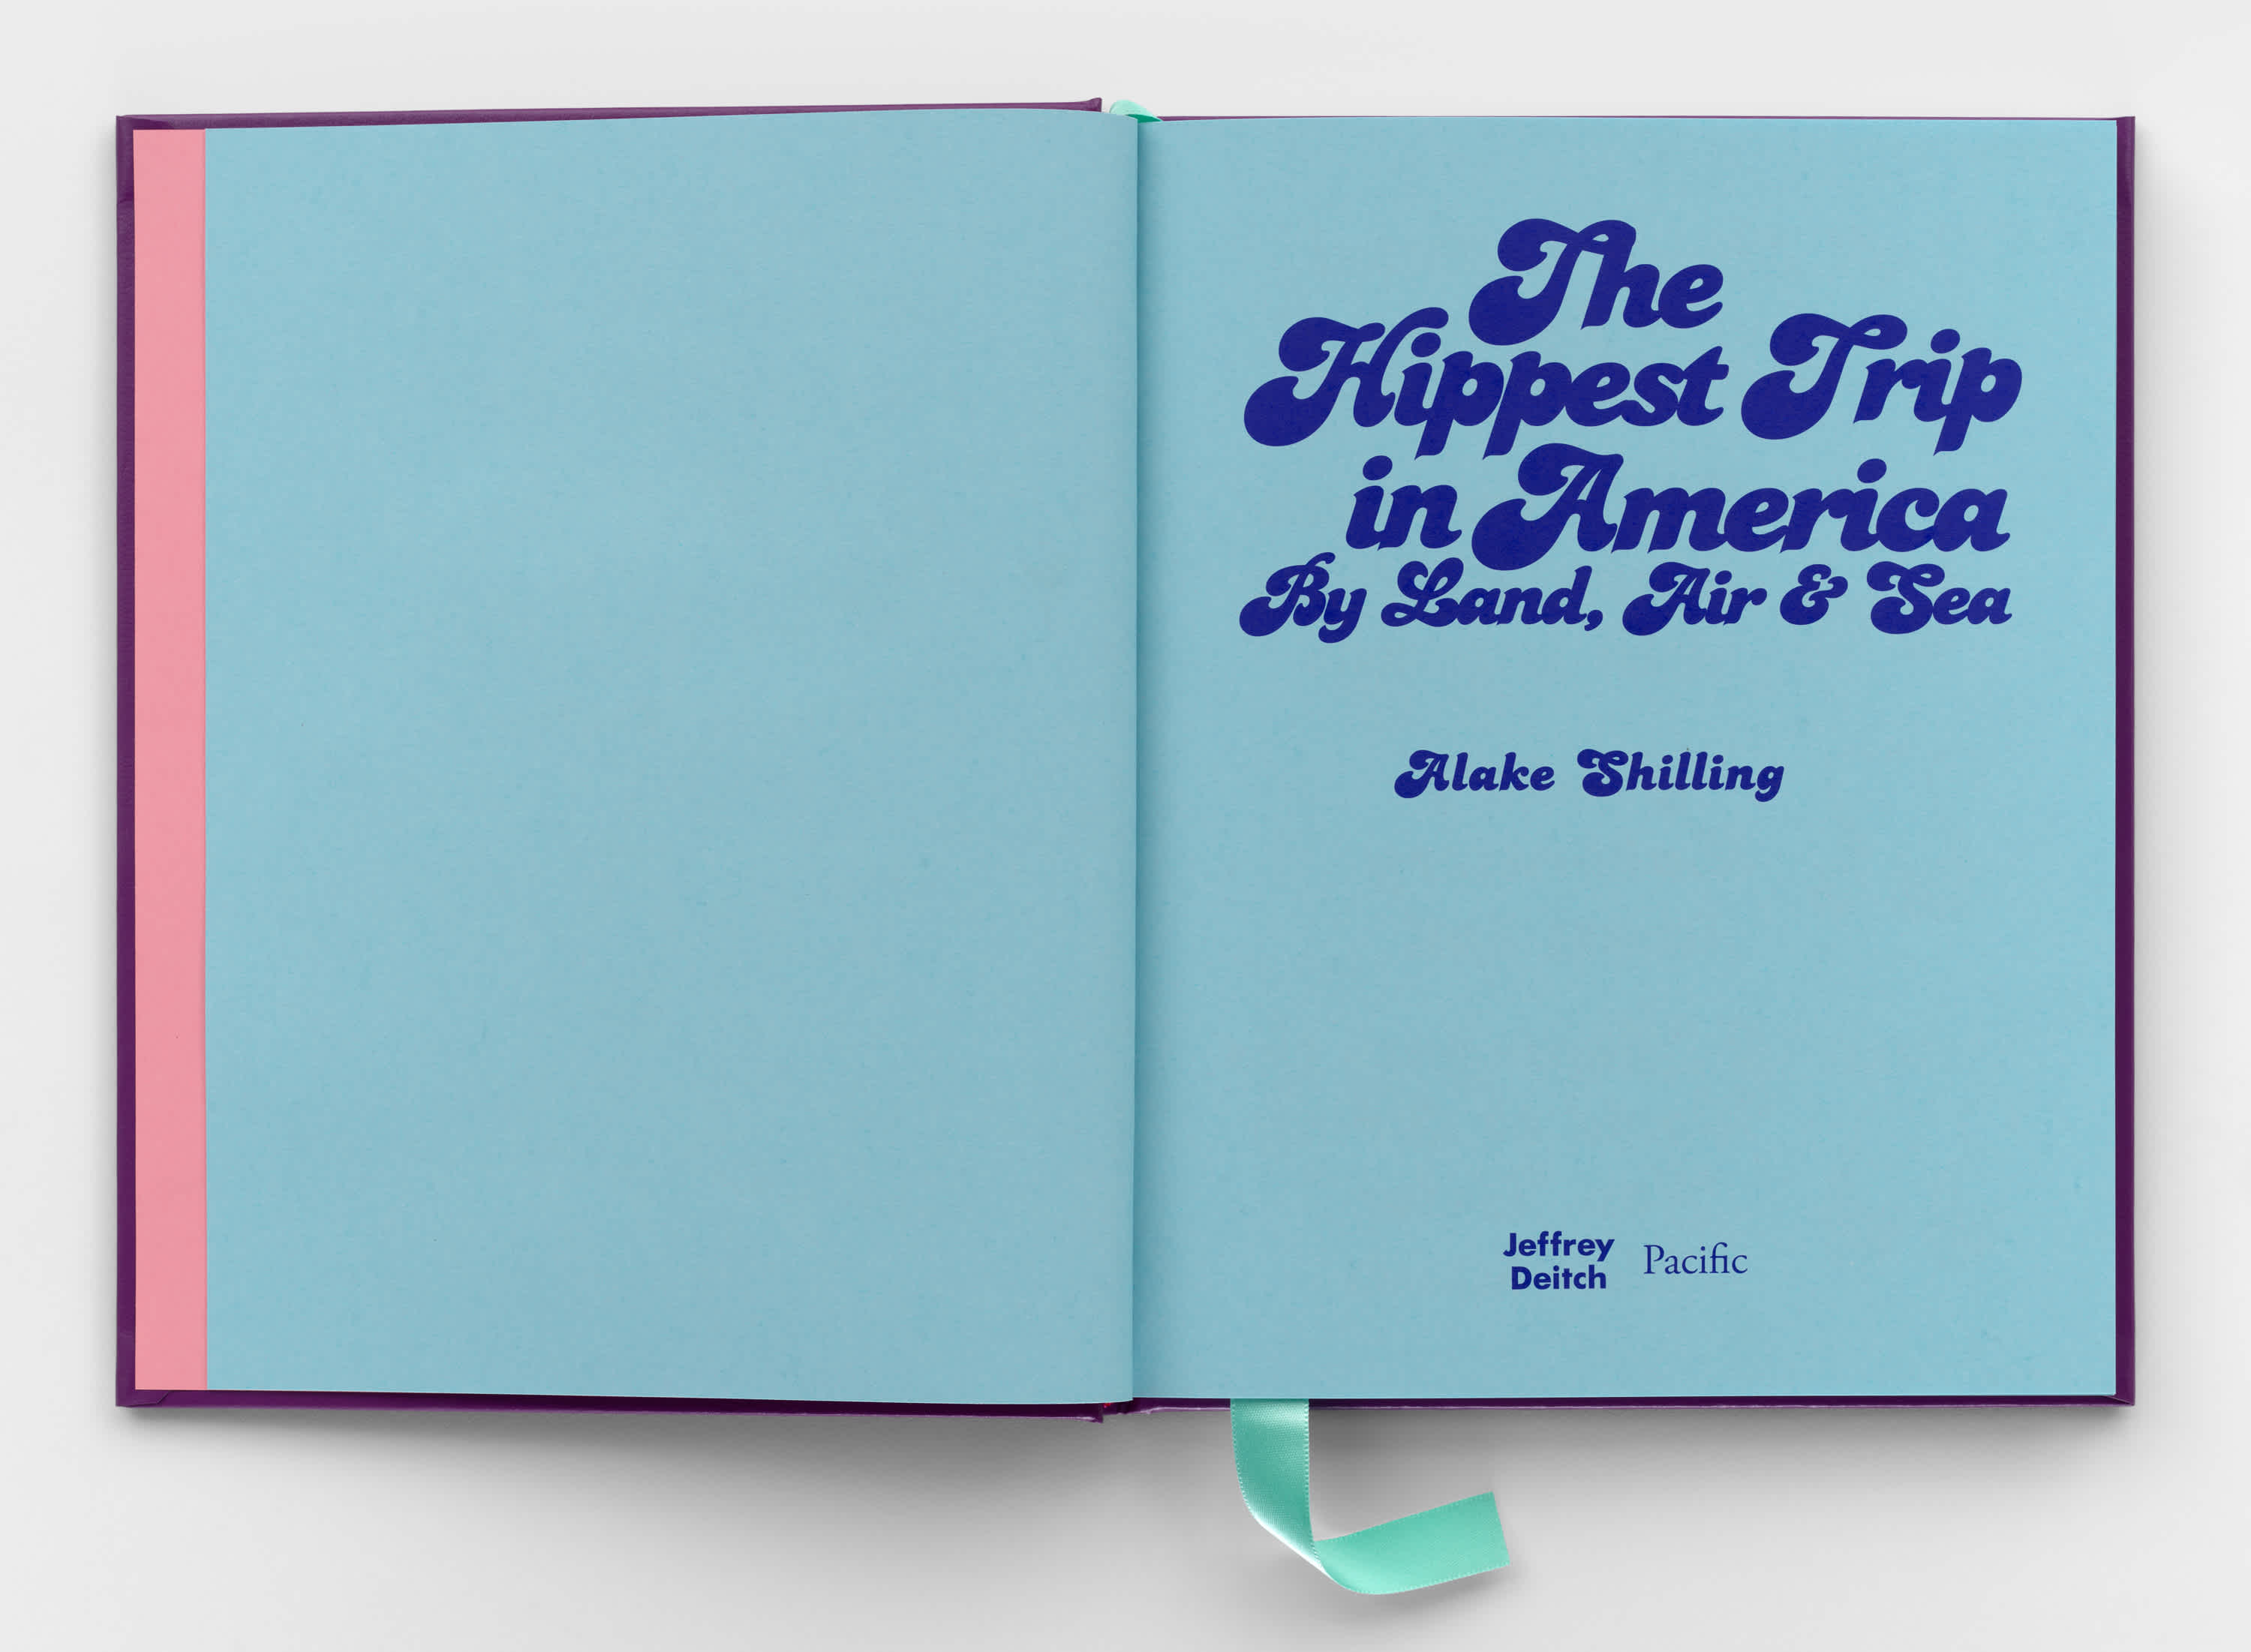 Both pages of the open book are bright blue. A strip of pink can be seen between the open cover and the left page. Dark blue psychedelic letters take up most of the right page. A light blue ribbon sticks out of the bottom center of the book, near the binding.